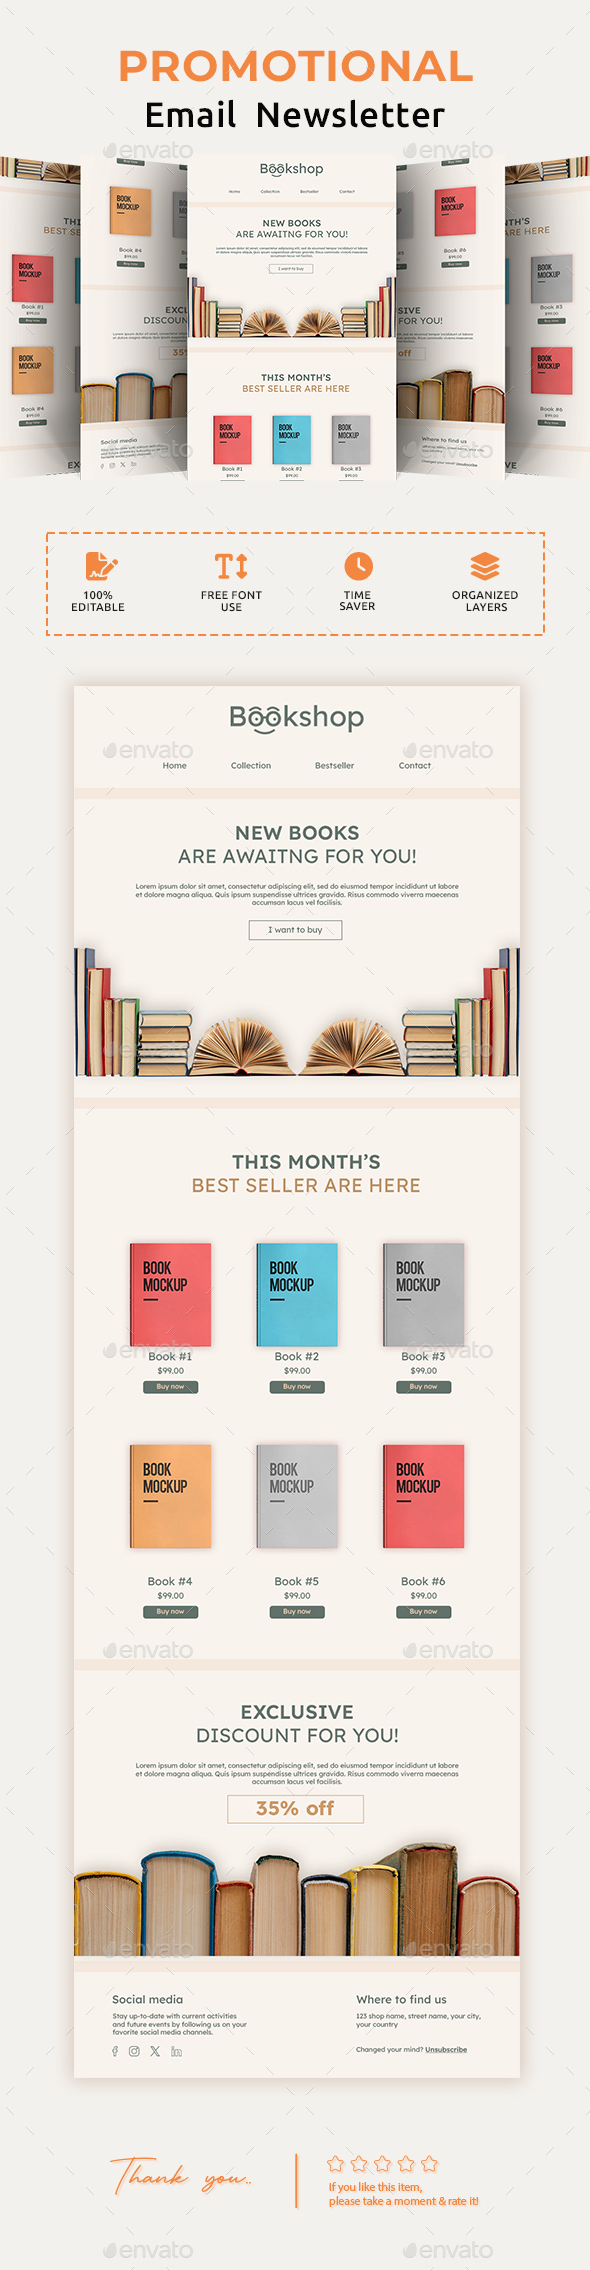 [DOWNLOAD]Book Shop or Library Email Newsletter PSD Template